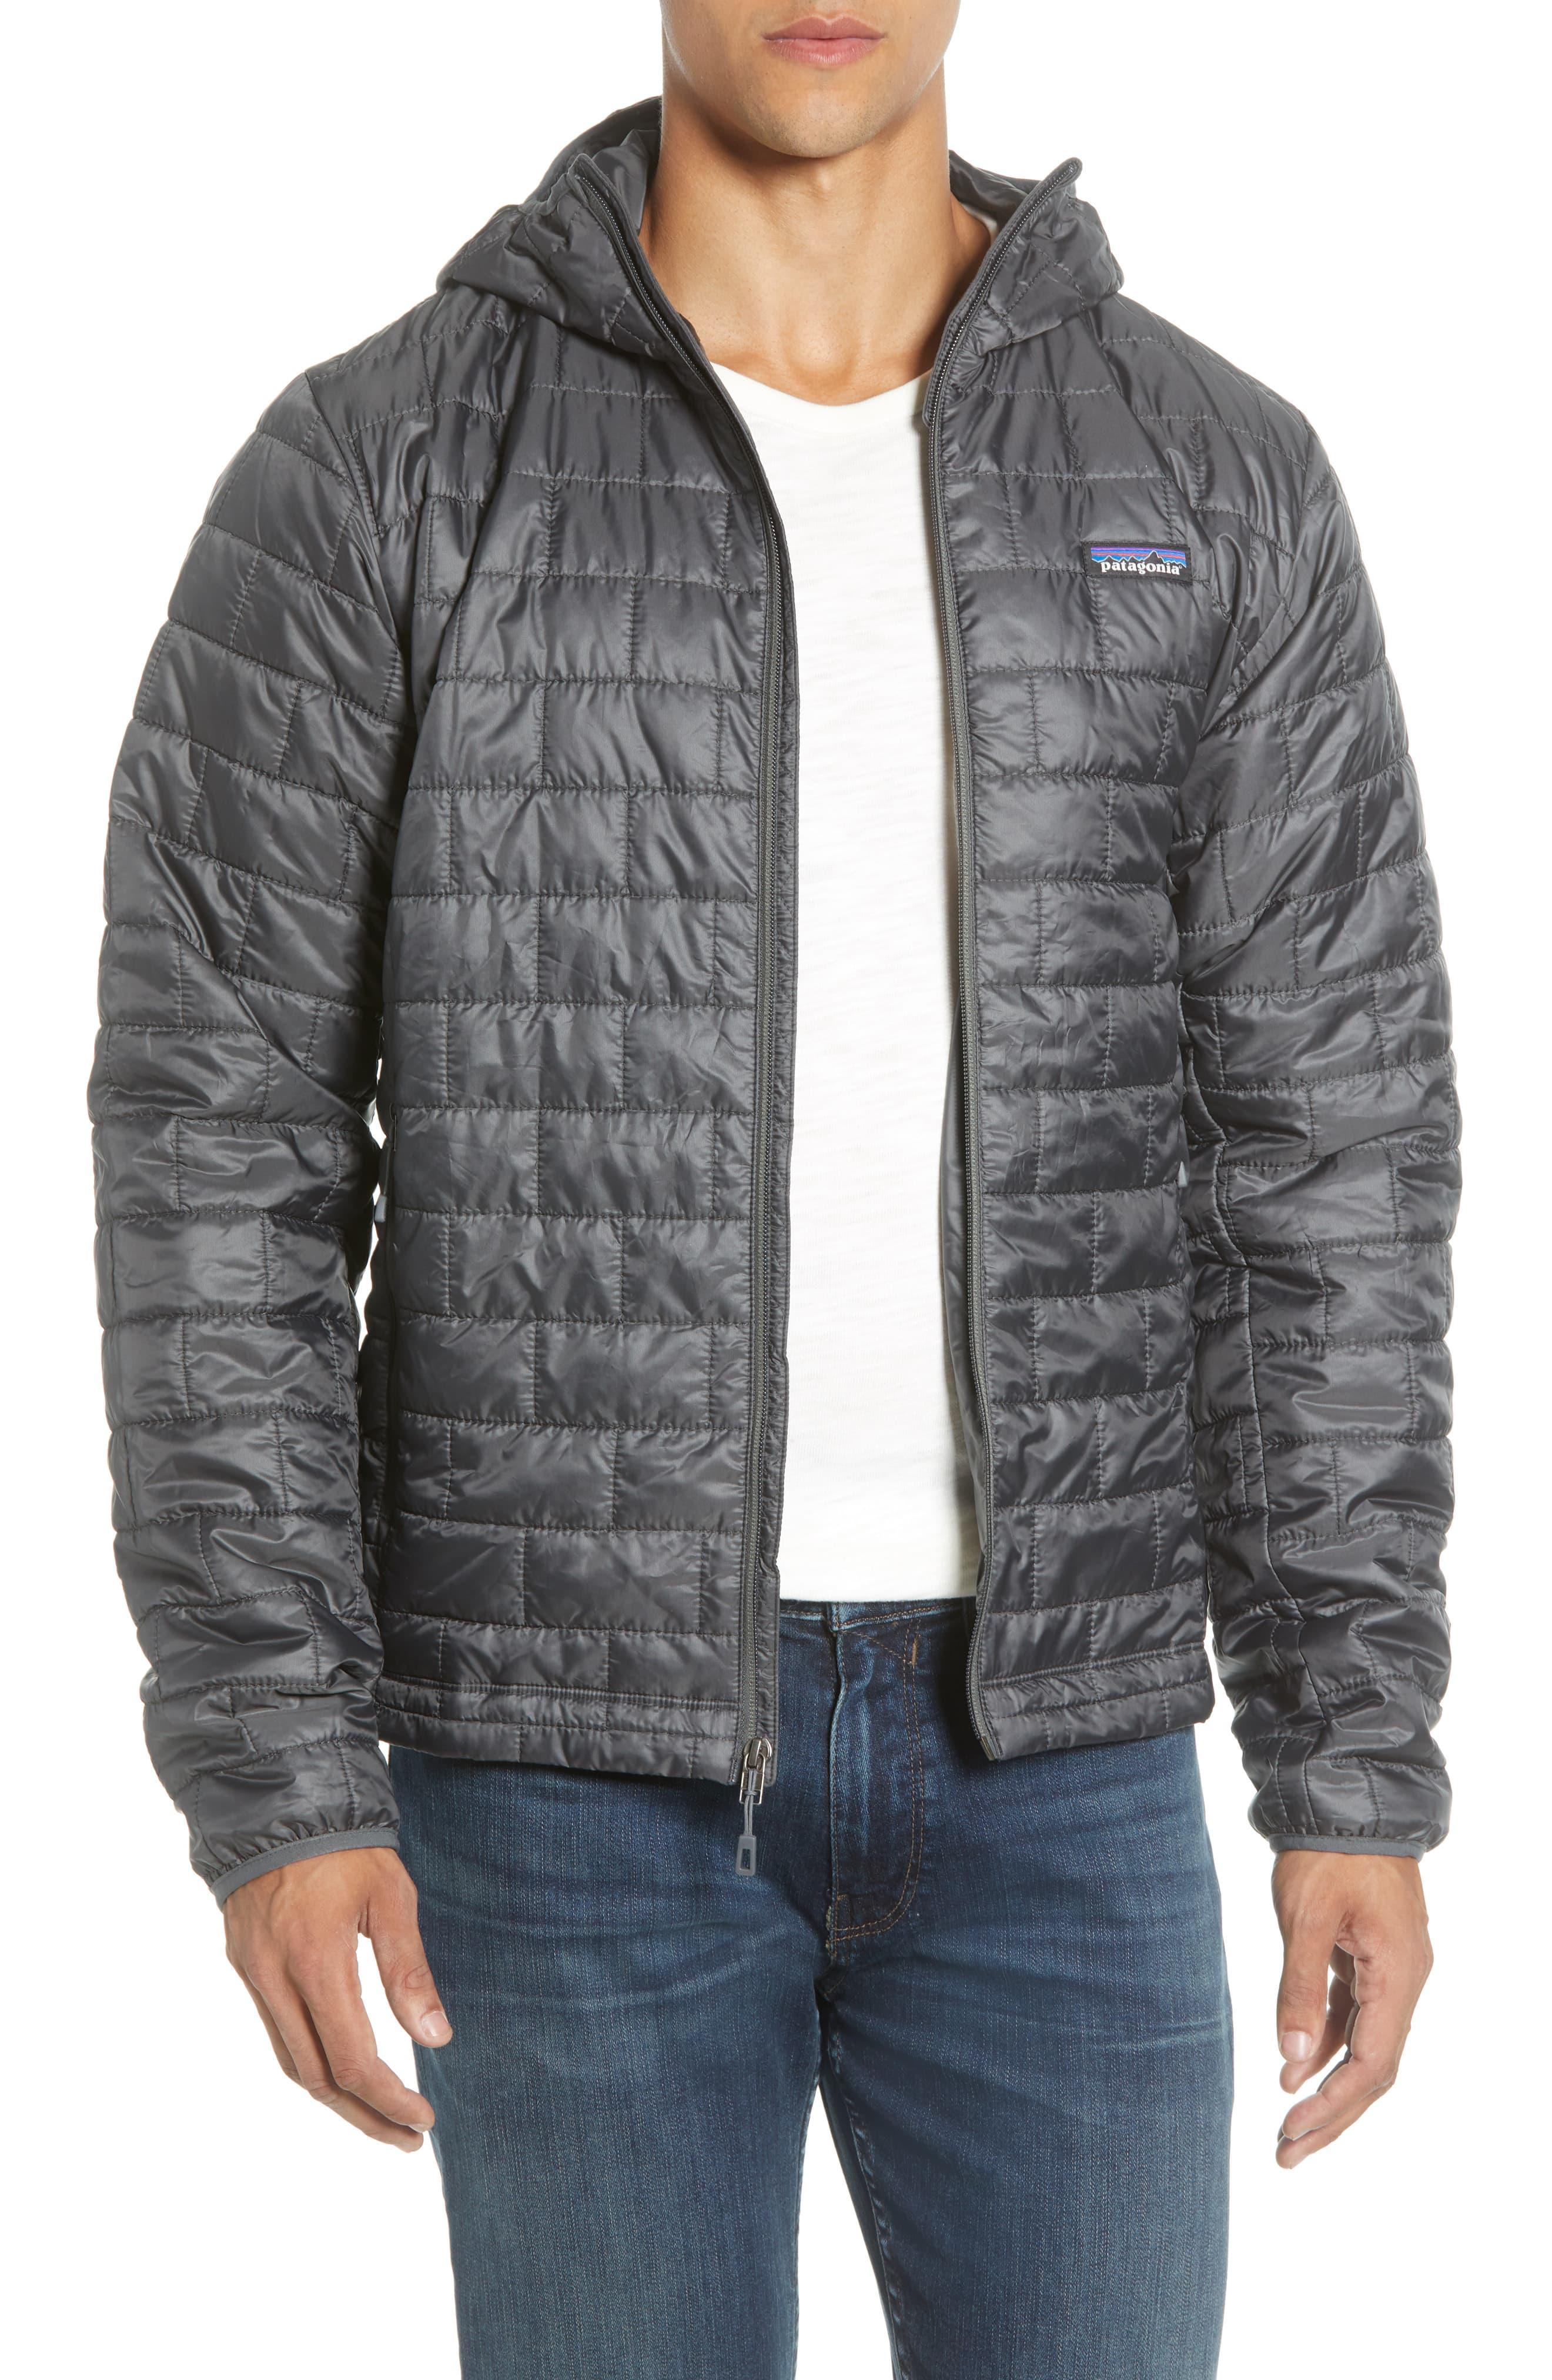 Patagonia Nano Puff Hooded Jacket in Gray for Men - Lyst